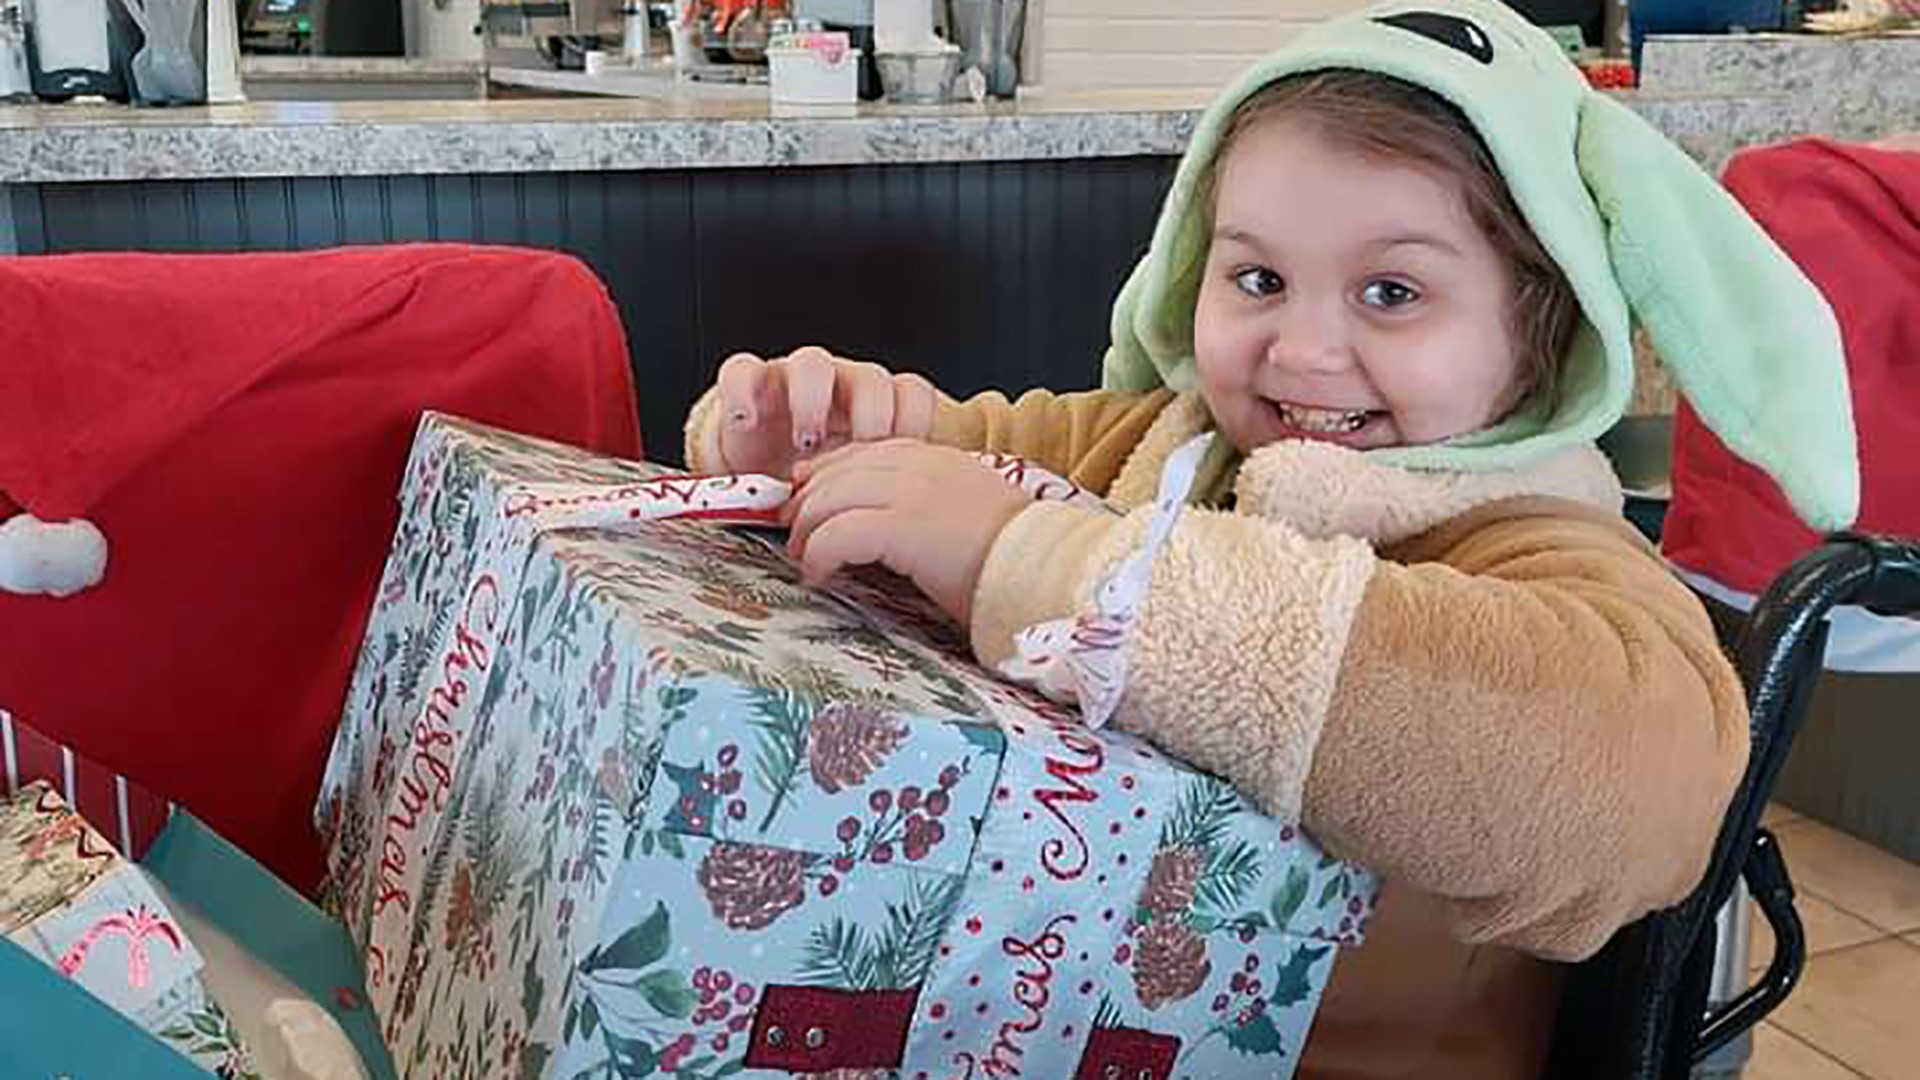 Isabella Castanza was discharged from the hospital on Dec. 10, more than two months after the crash.